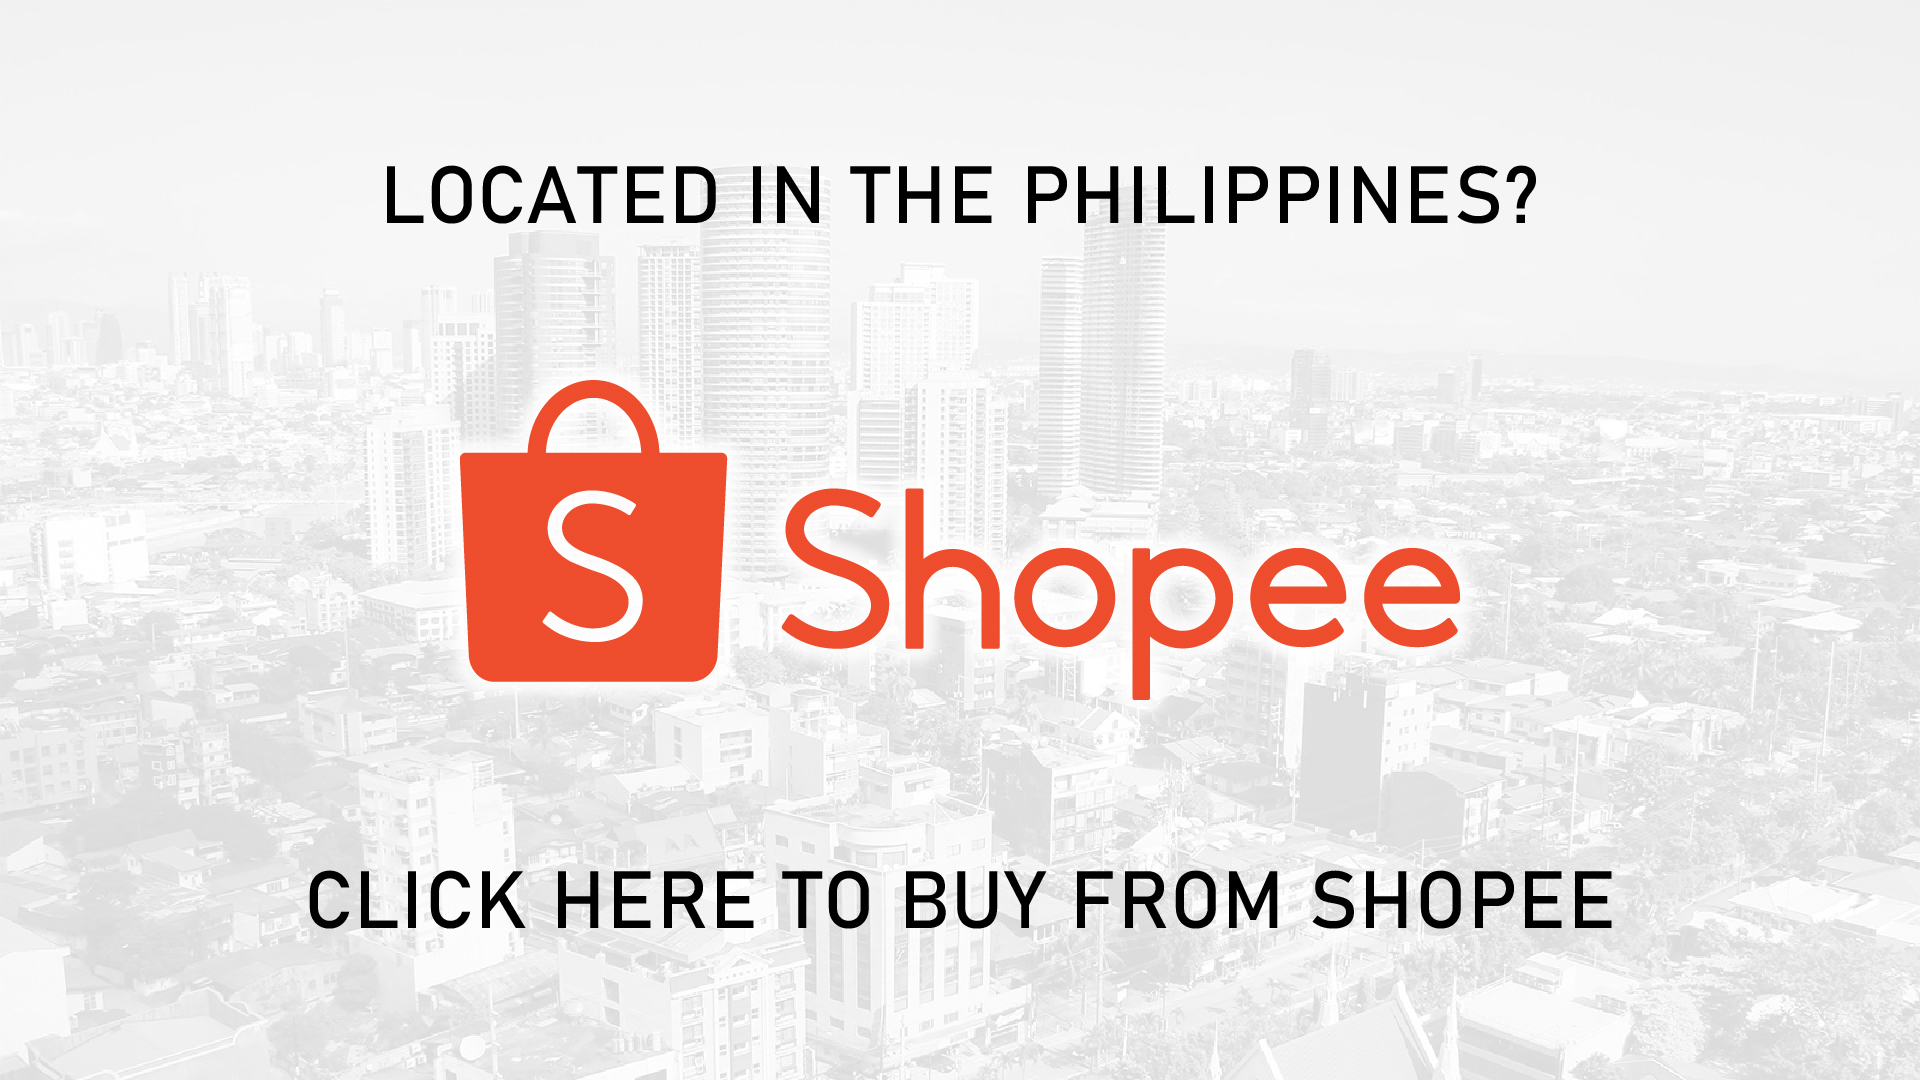 Located in the Philippines? Click here to buy from Shopee